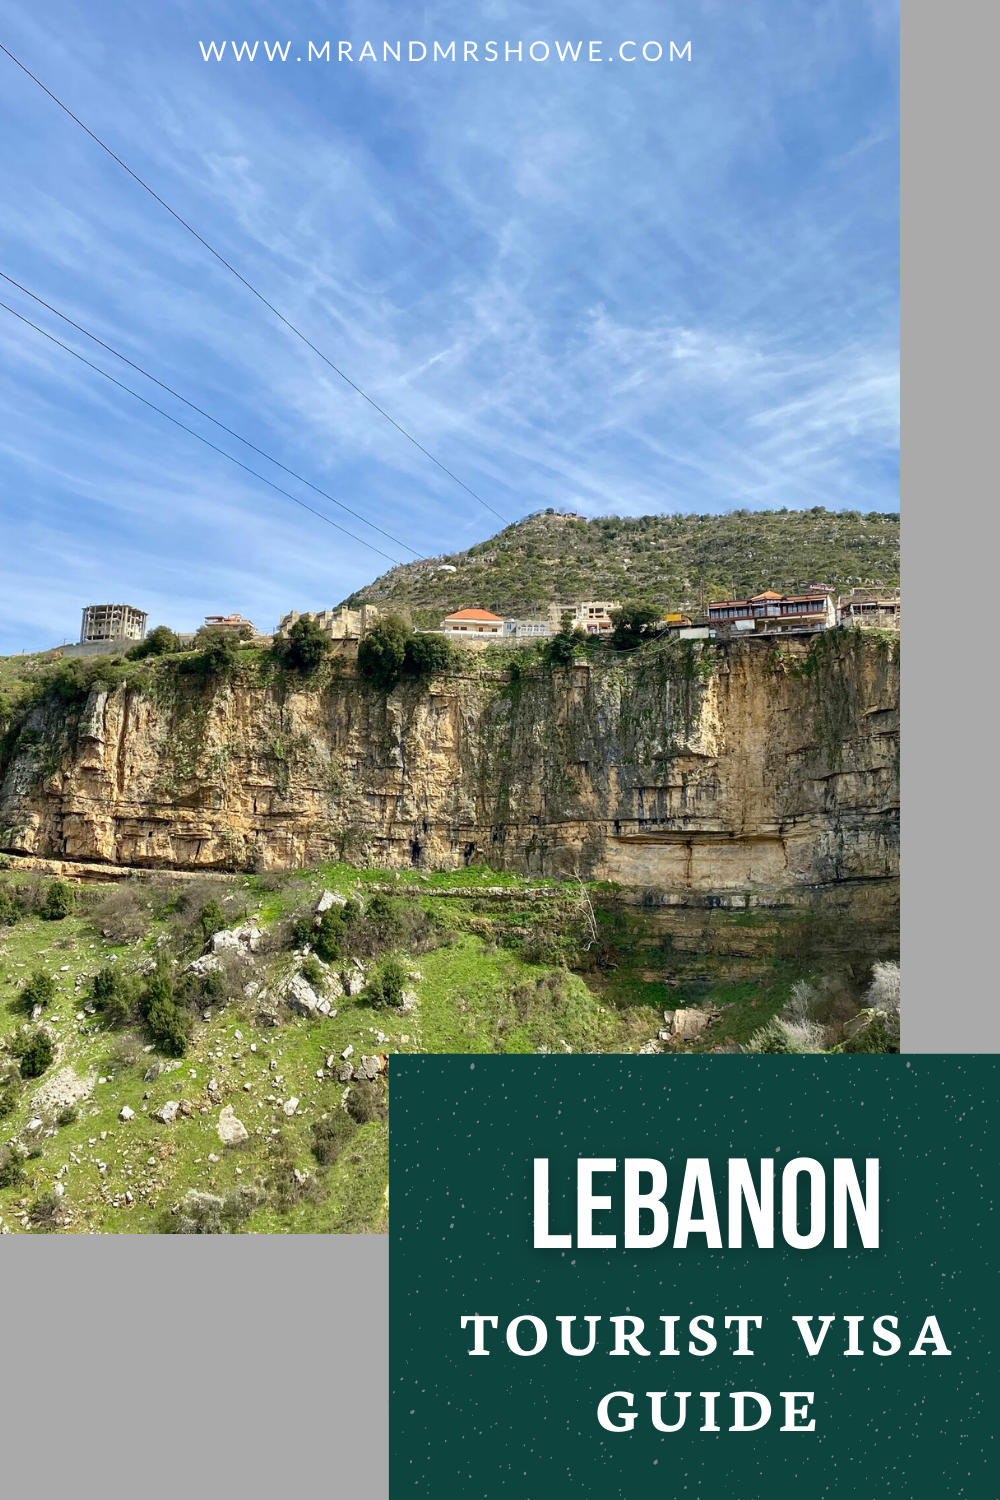 How To Get Lebanon Tourist Visa With Your Philippines Passport [Tourist Visa Guide For Lebanon]1.png